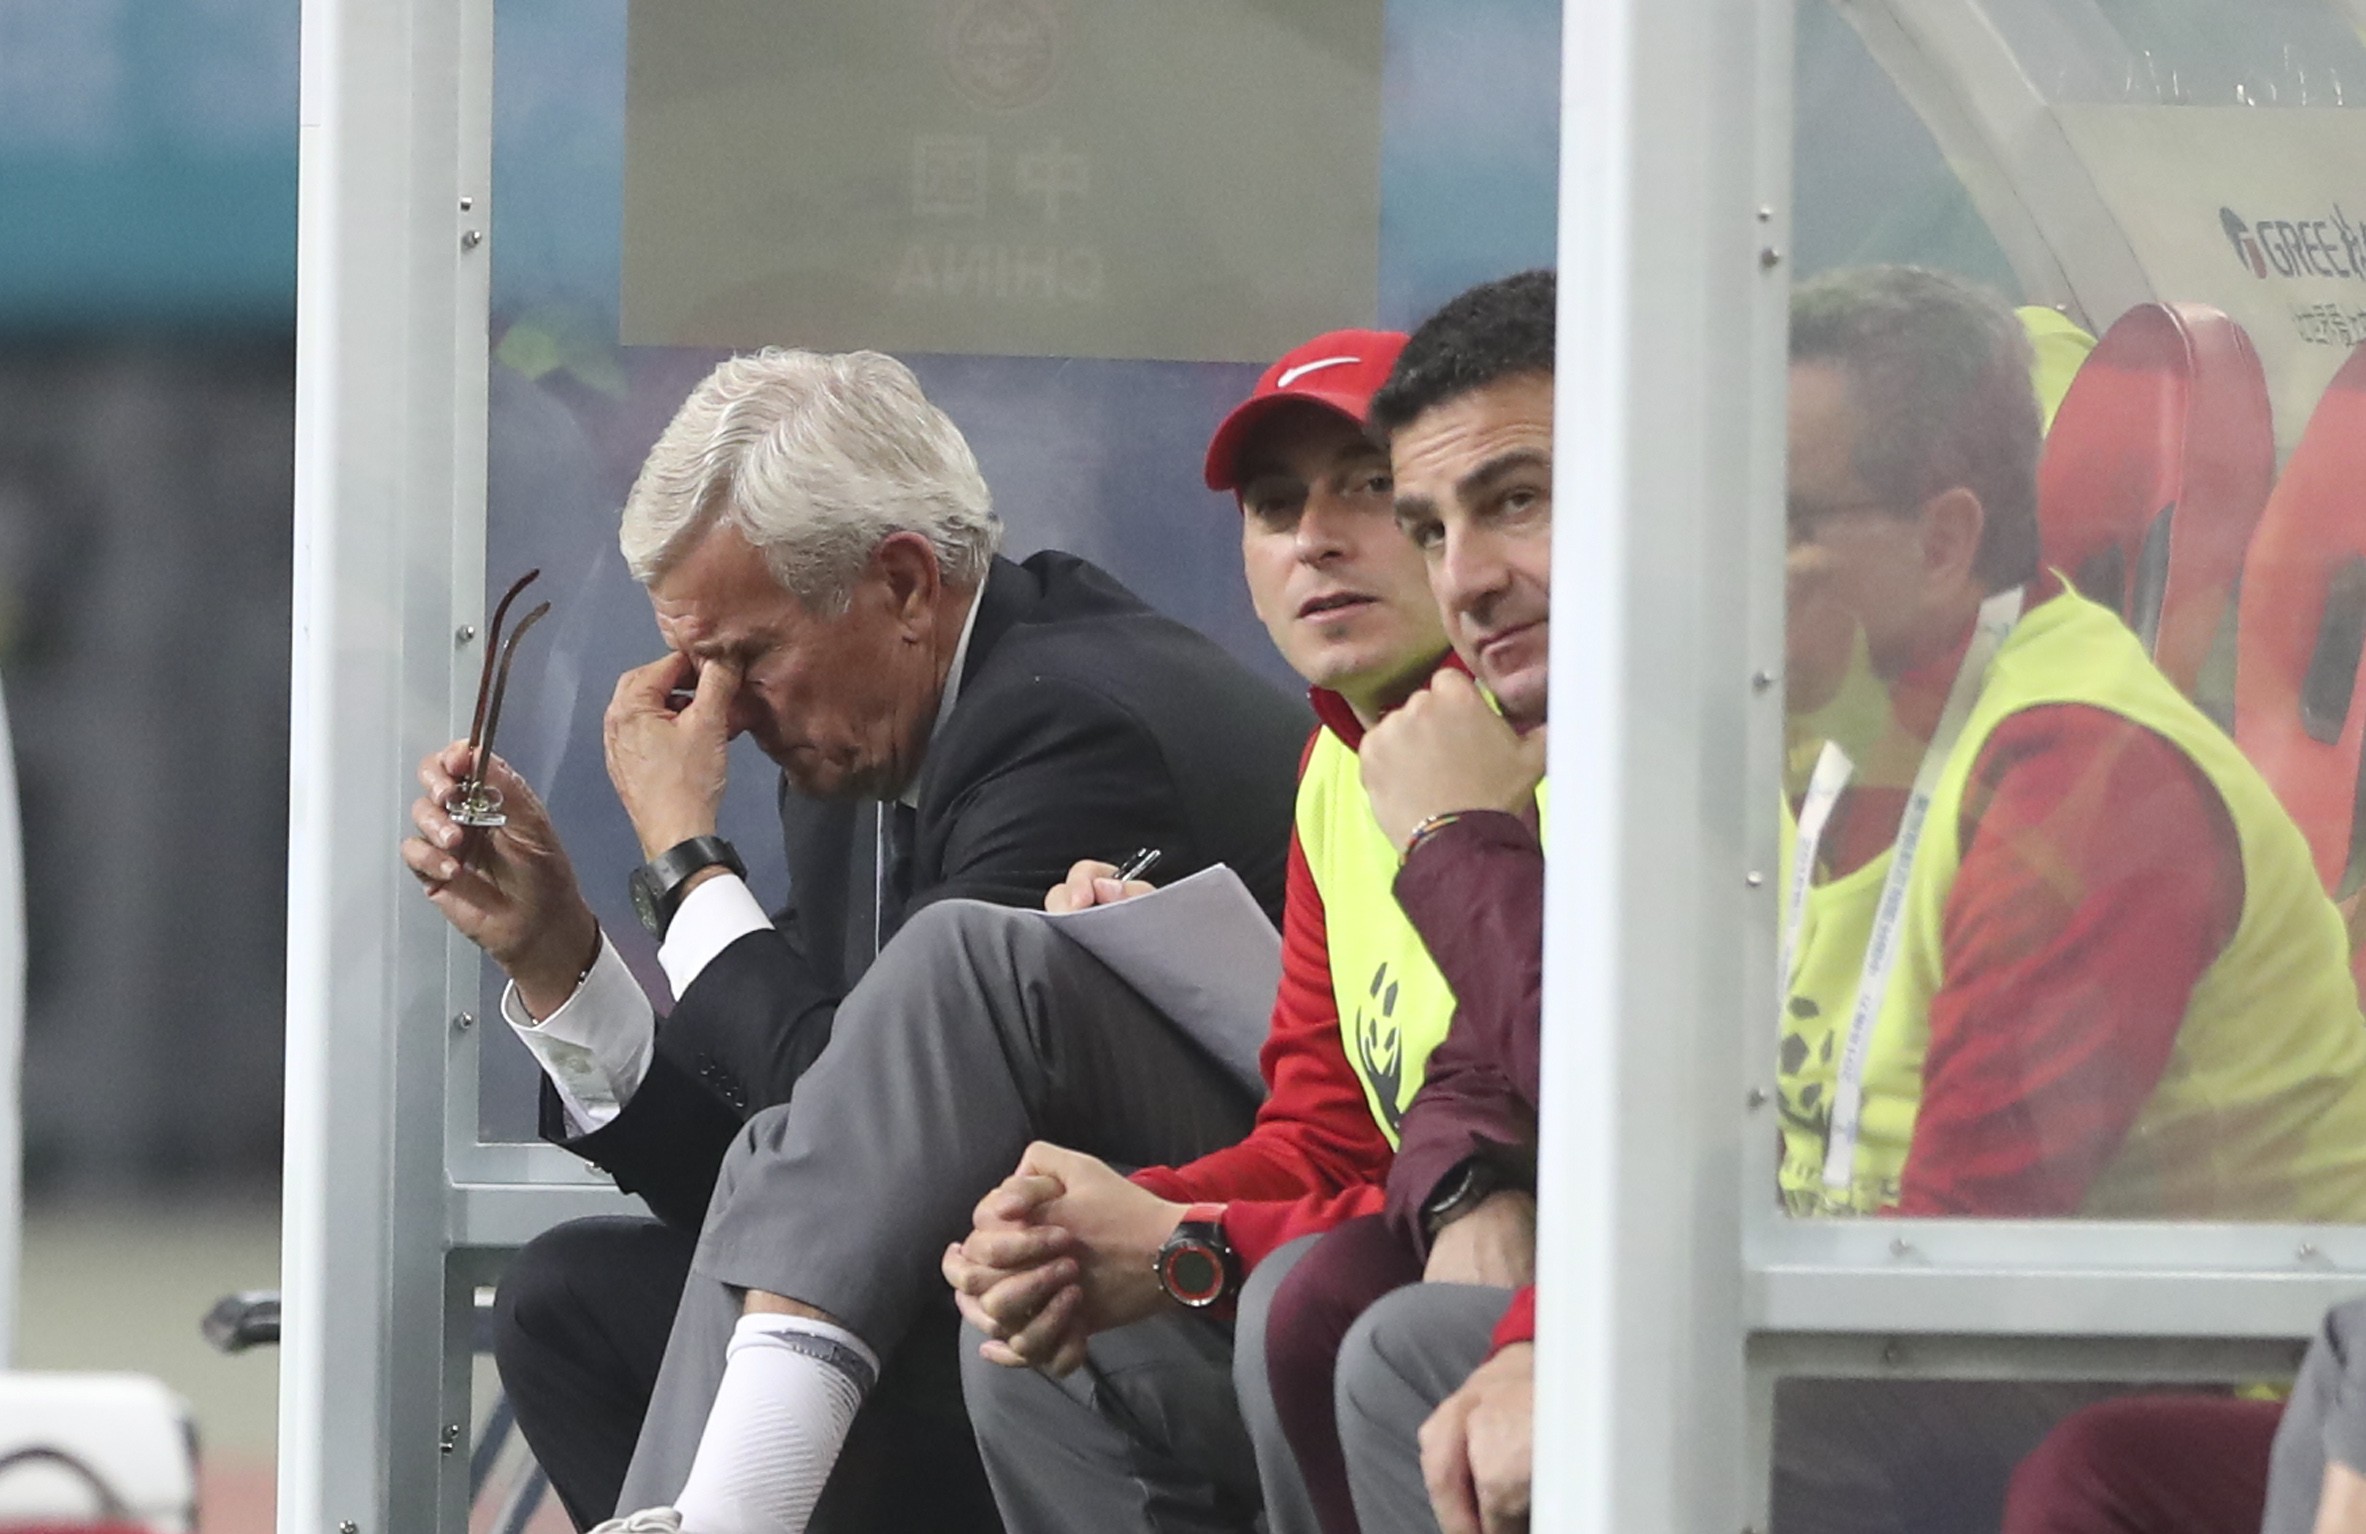 China manager Marcello Lippi admitted to making some mistakes following his team’s mauling at the hands of Wales. Photo: Xinhua